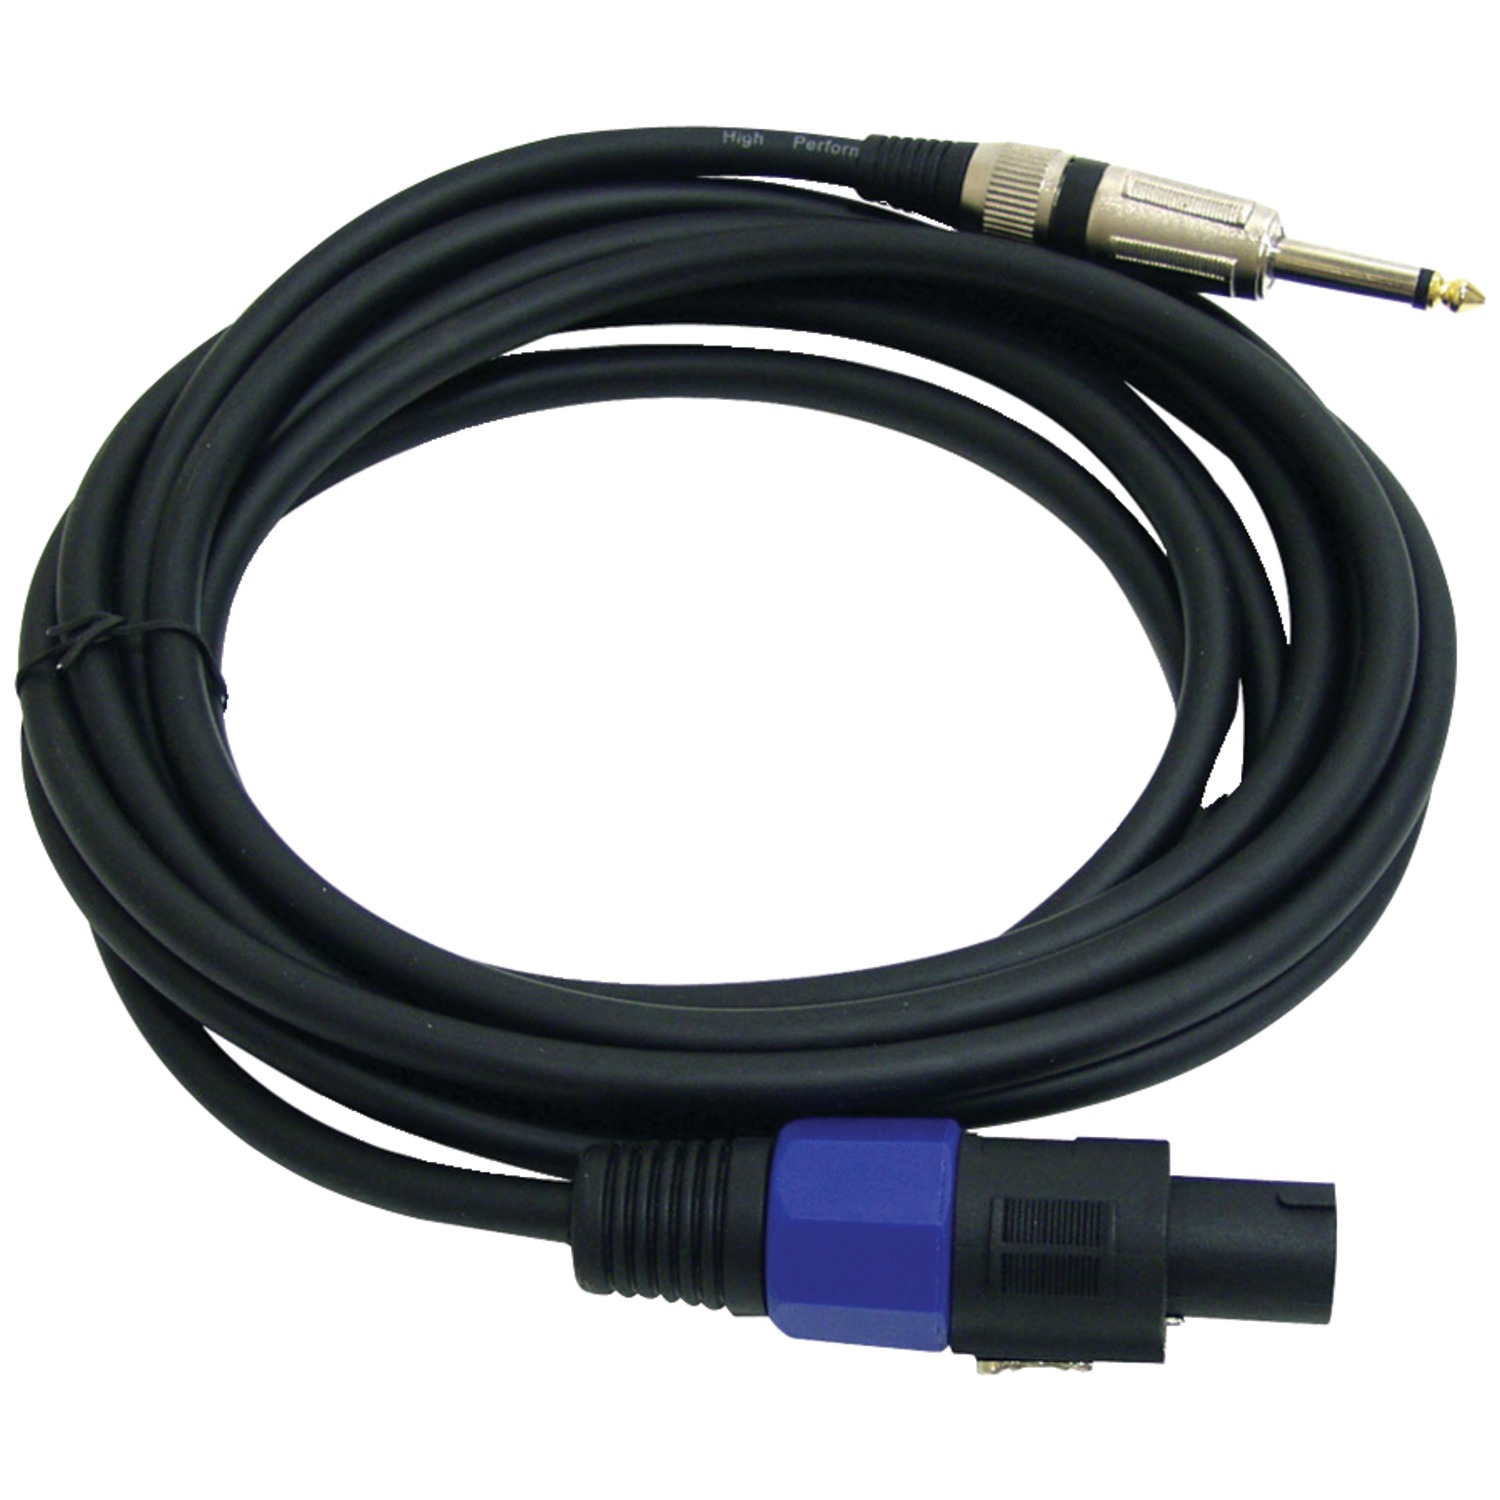 PylePro - PPSJ15 - 15ft. 12 Gauge Professional Speaker Cord Compatible With Speakon Connector to 1/4" Male - image 1 of 4